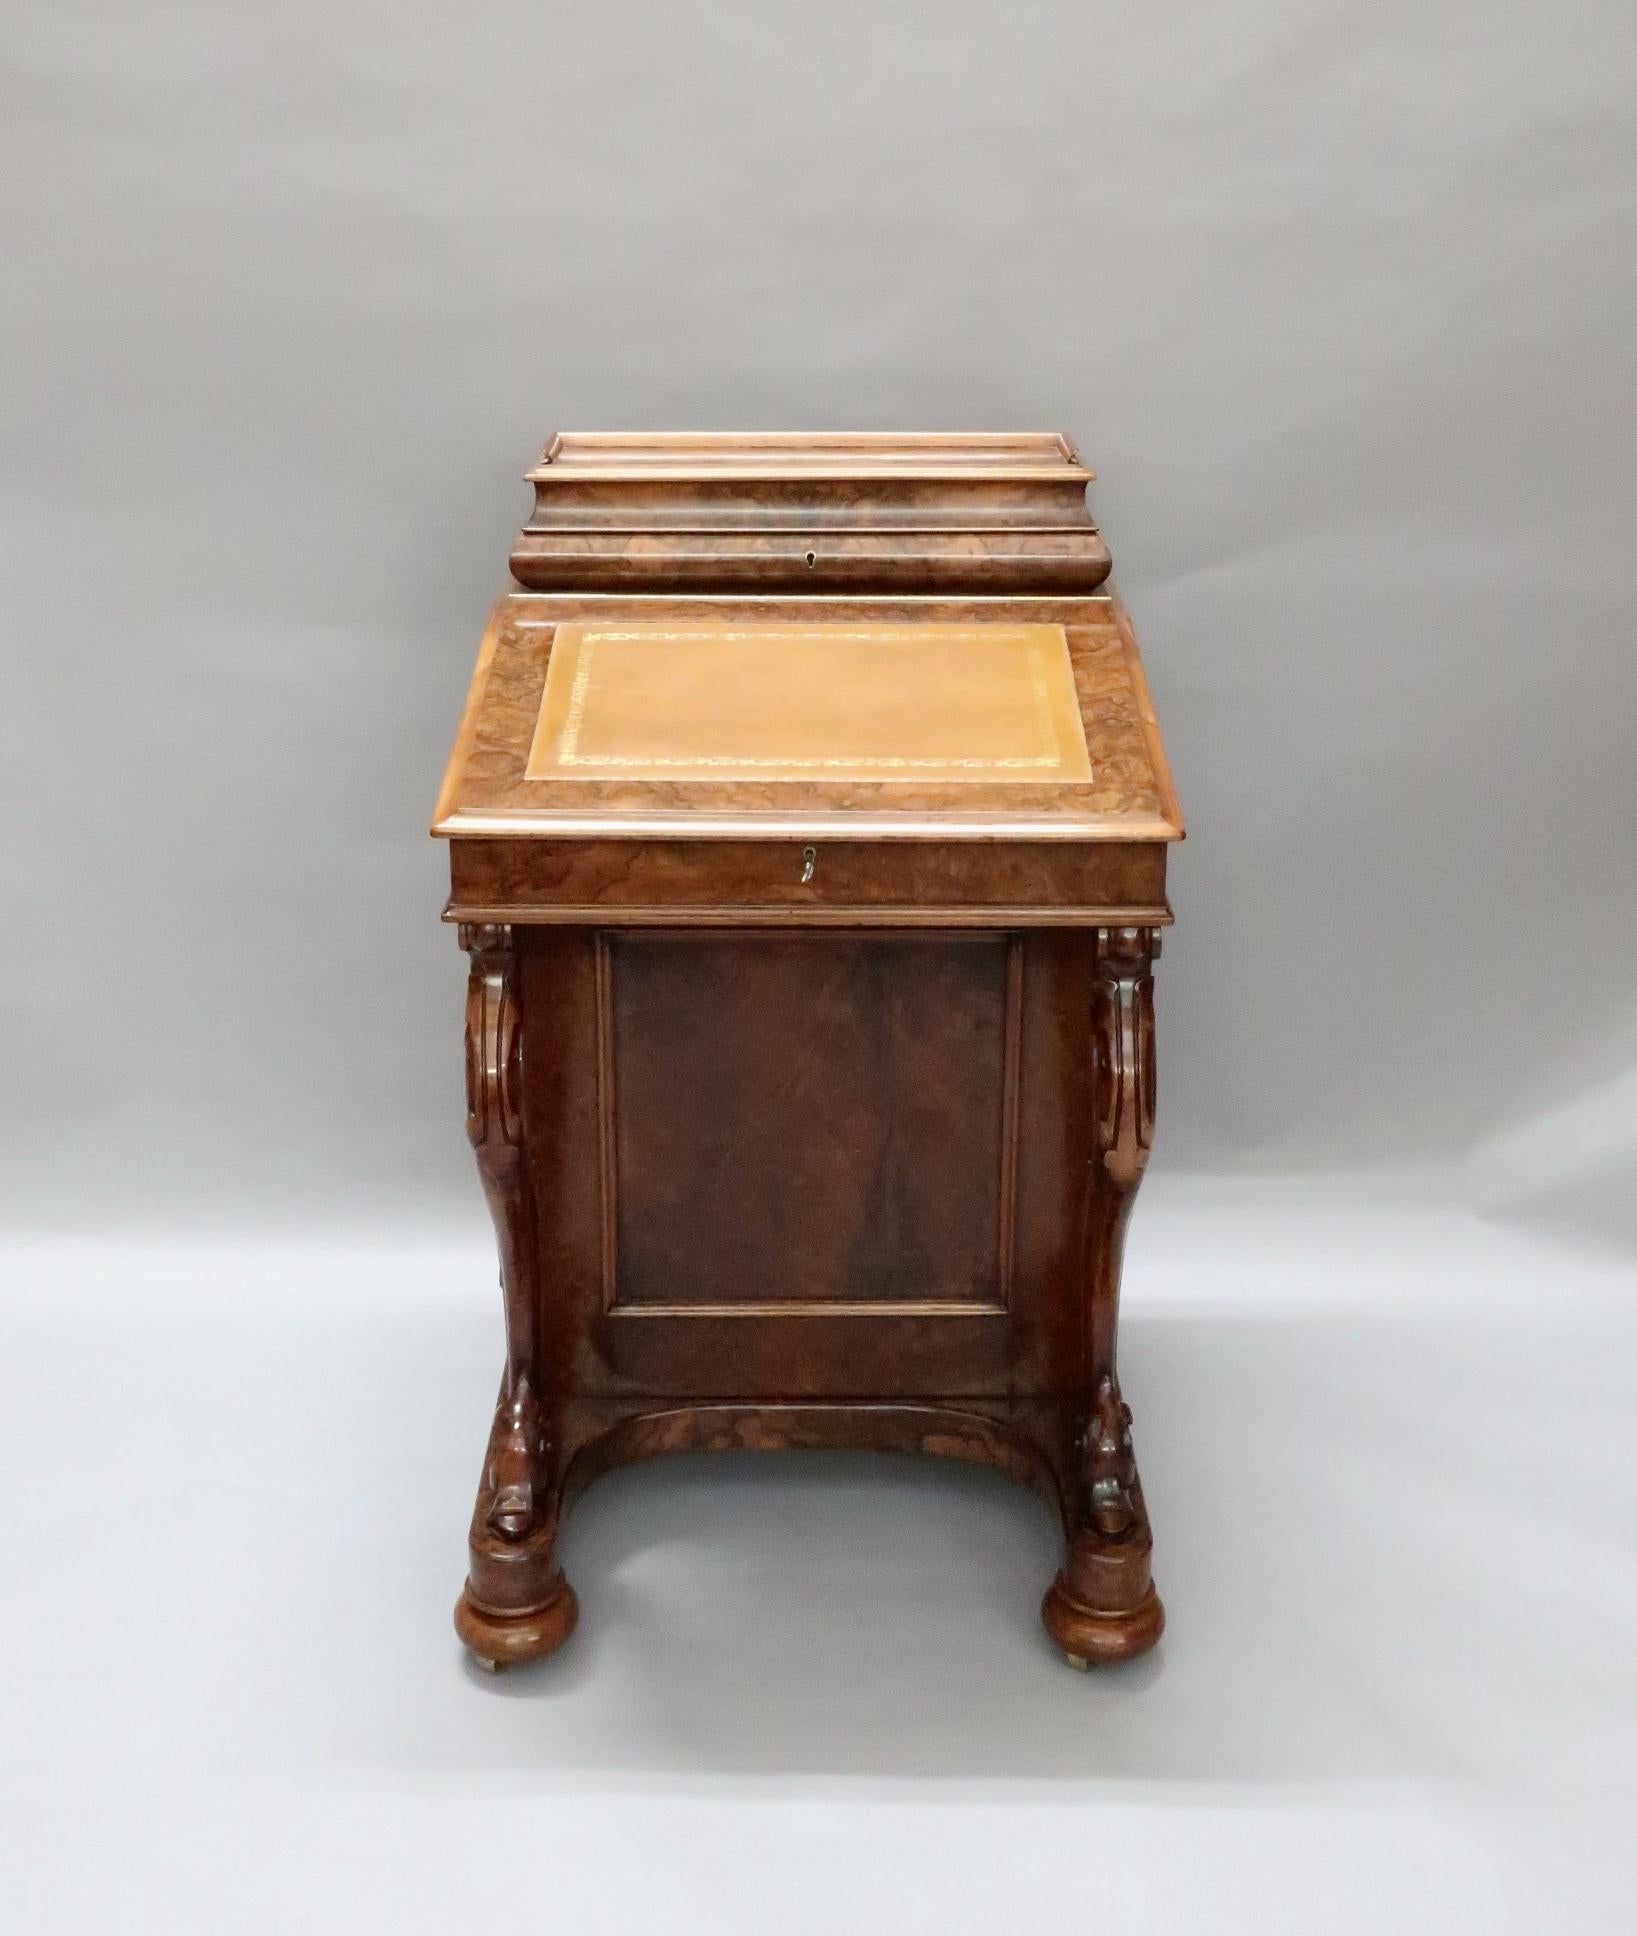 A superb quality Victorian burr walnut Davenport writing desk stood on turned bun feet and shaped carved cabriole legs to the front. The Davenport has very nice quality turned knobs to the drawers with a folding back lid to the top which reveals the